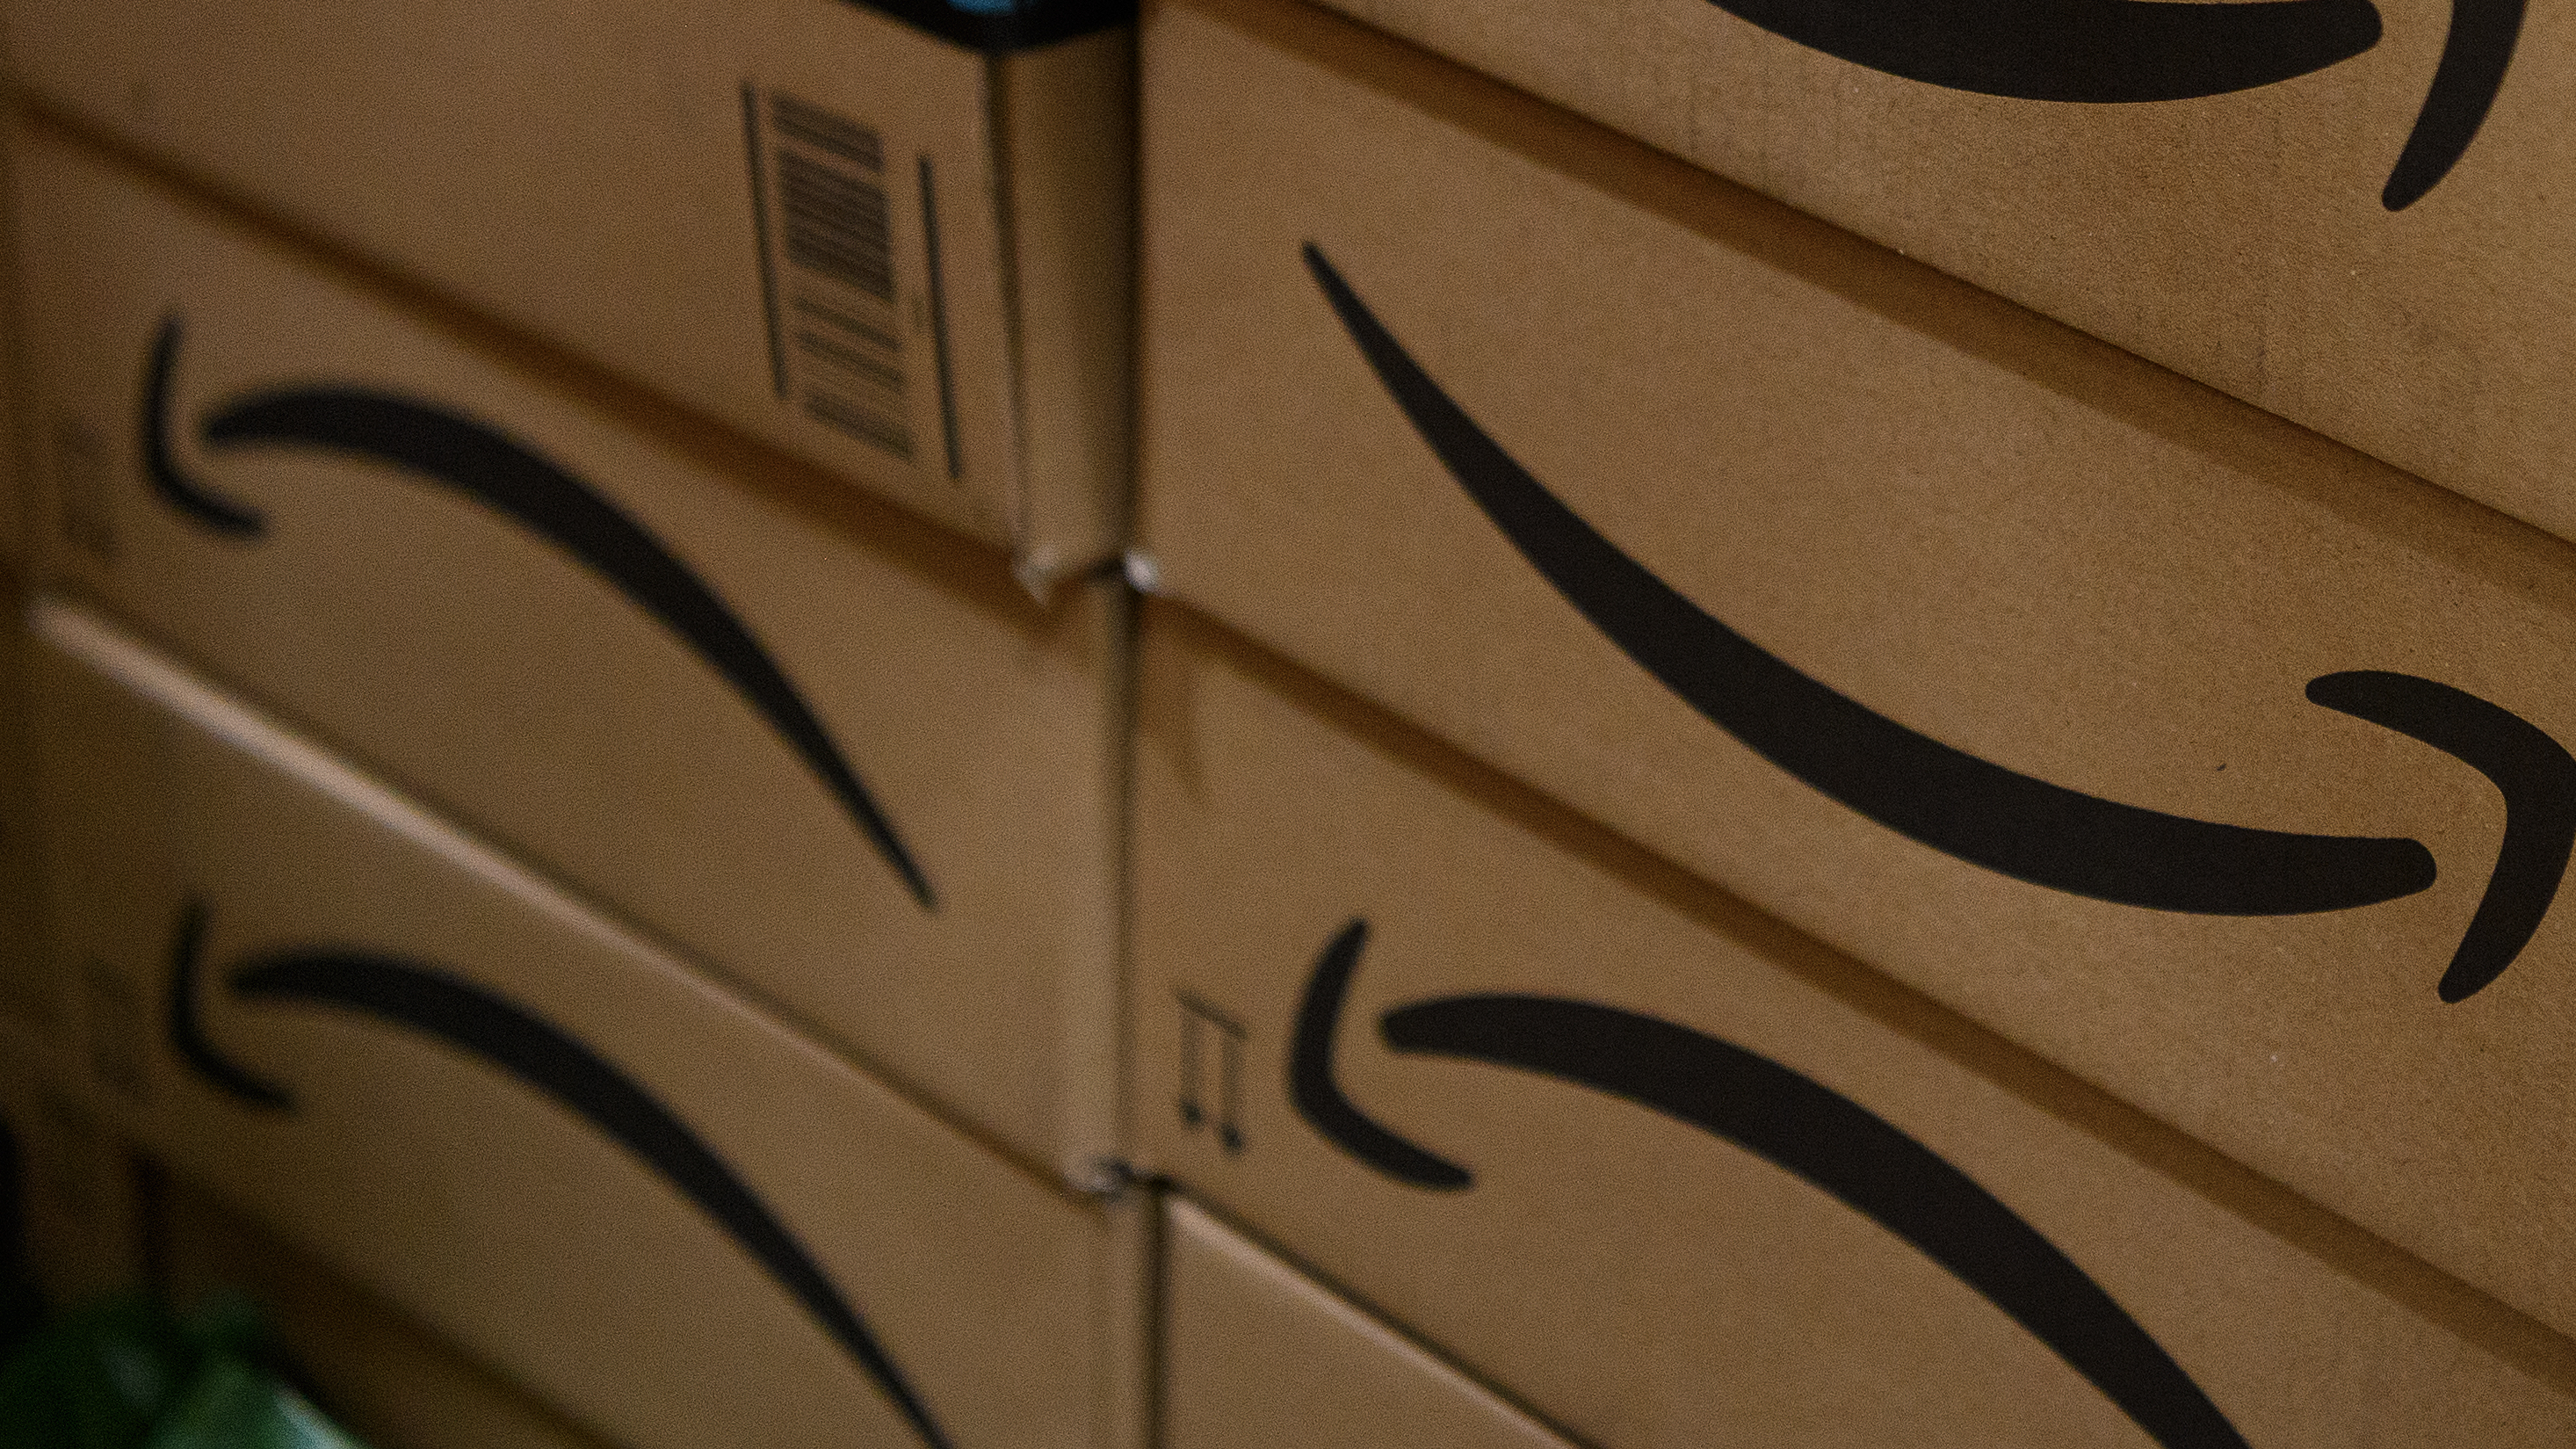 Amazon Prime’s Promise Of Two-Day Delivery Is Dying